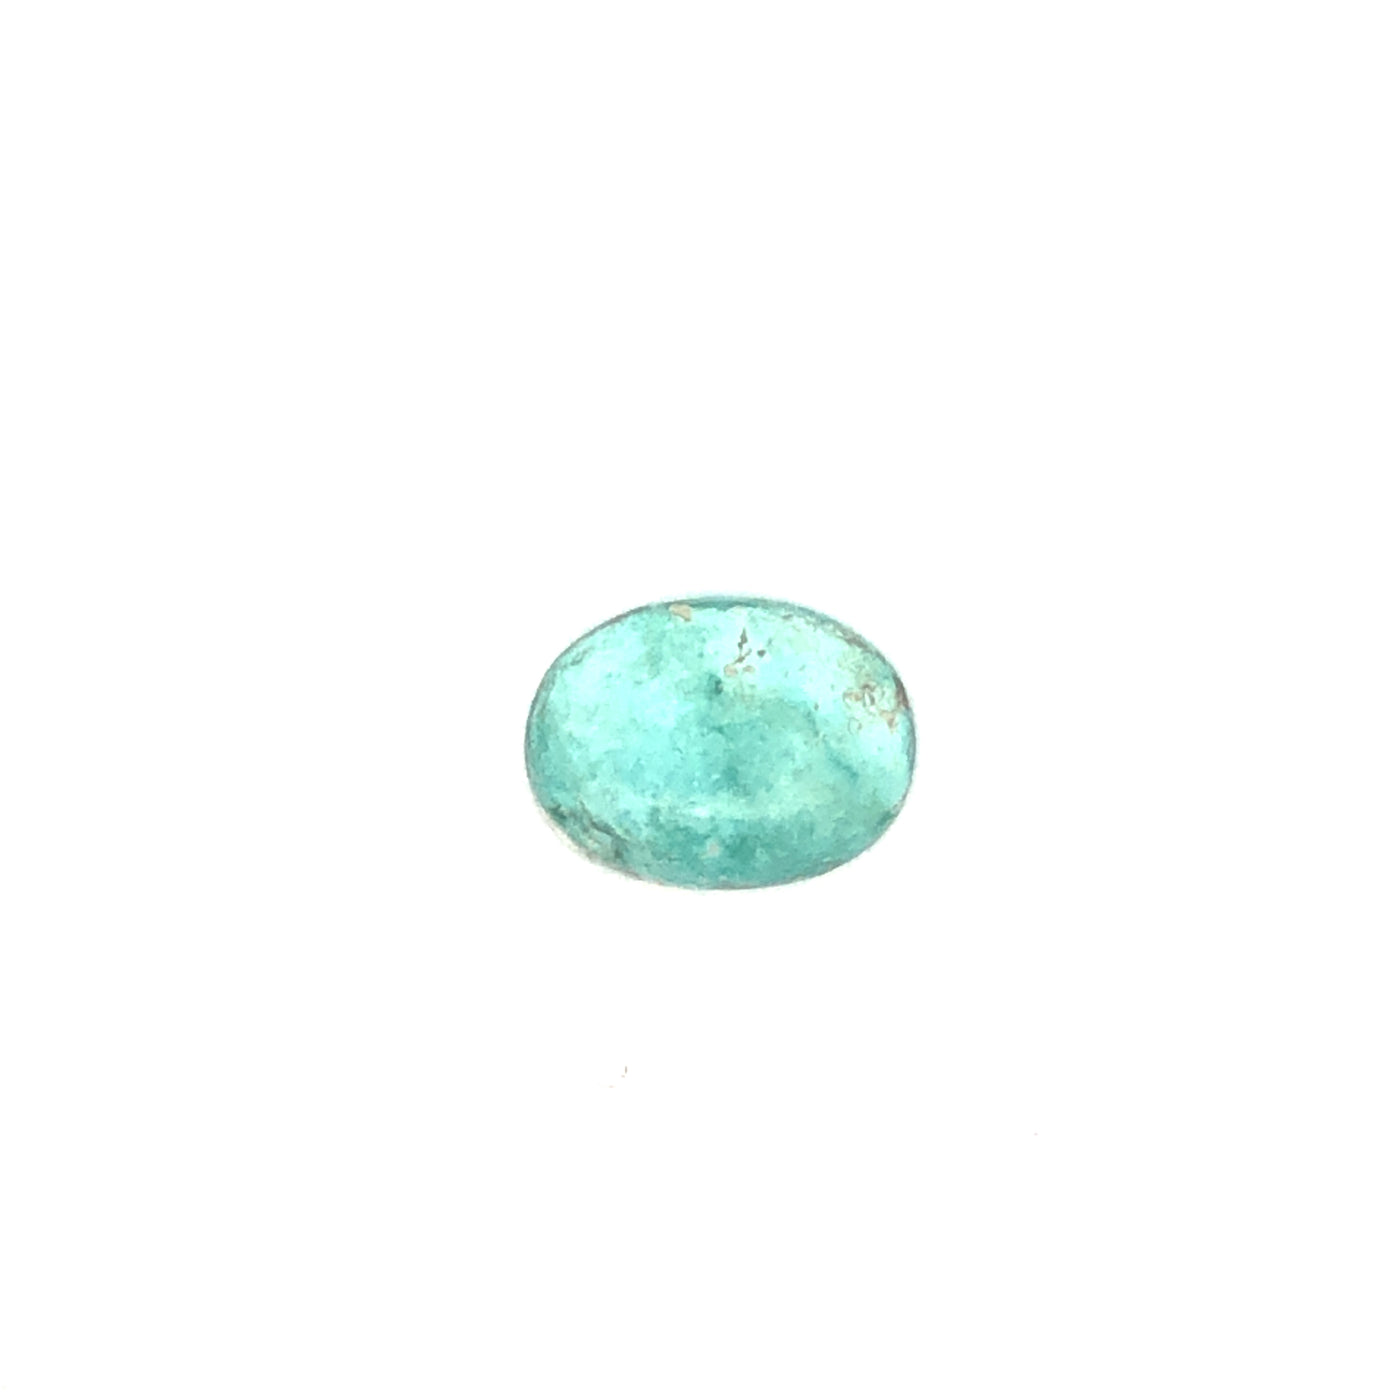 Loose Narooma Turquoise Oval Shaped 7.18Ct Blue